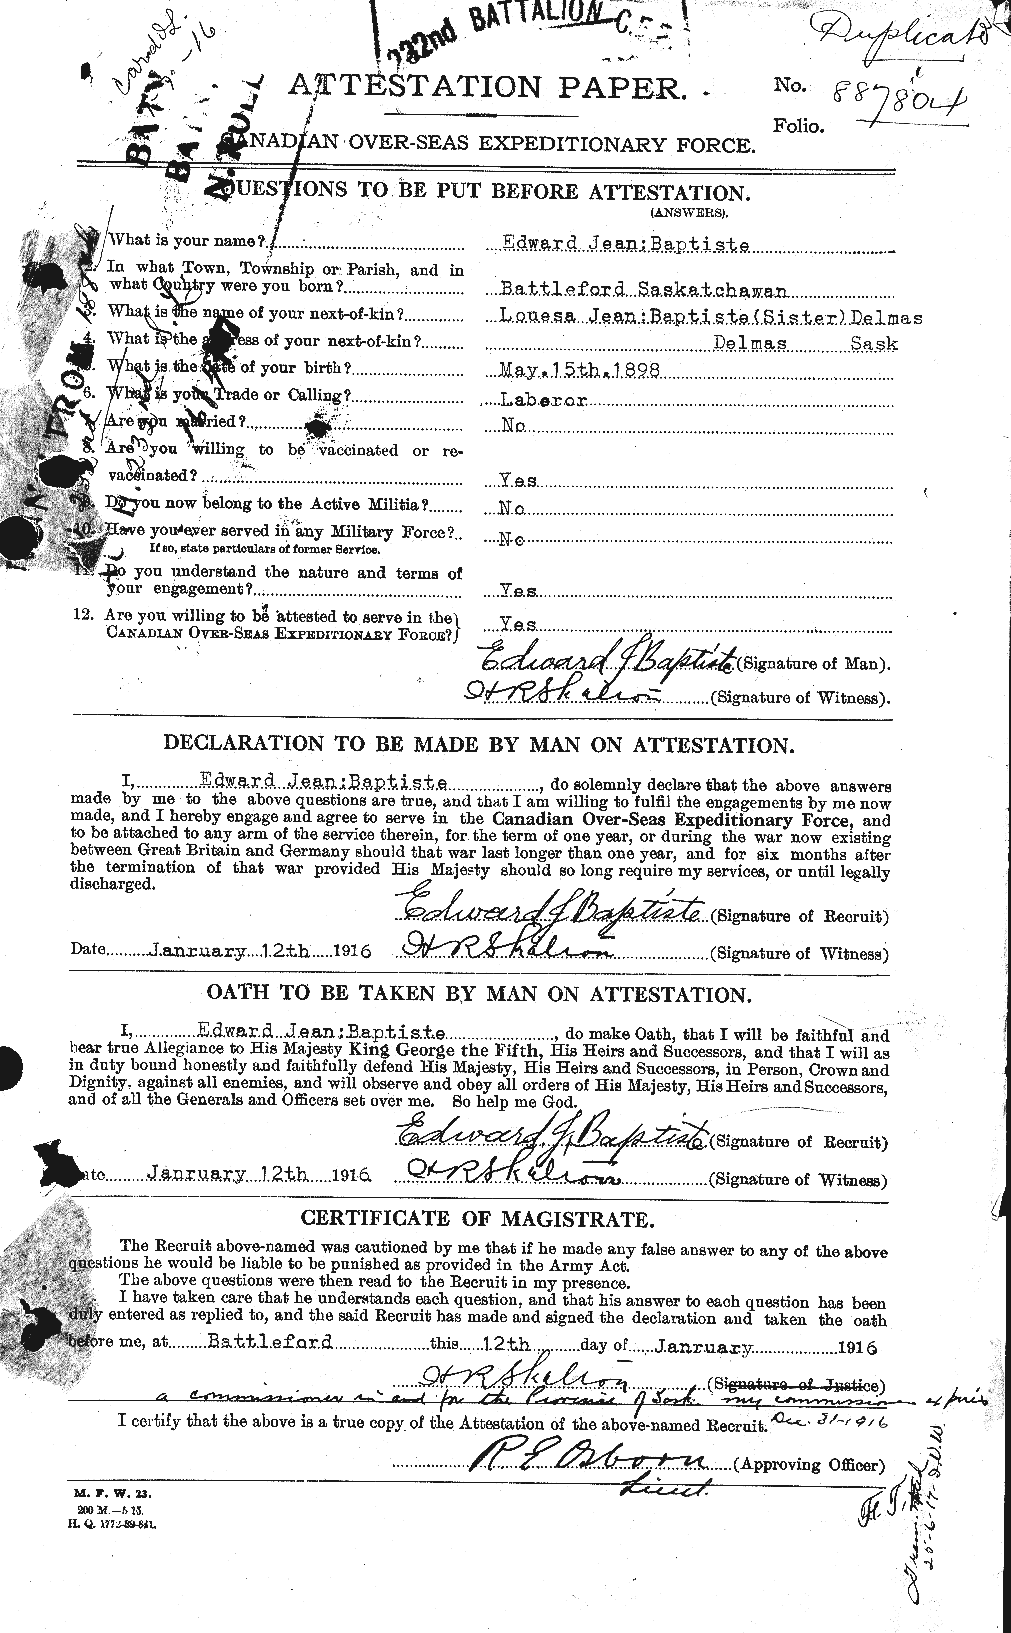 Personnel Records of the First World War - CEF 220537a